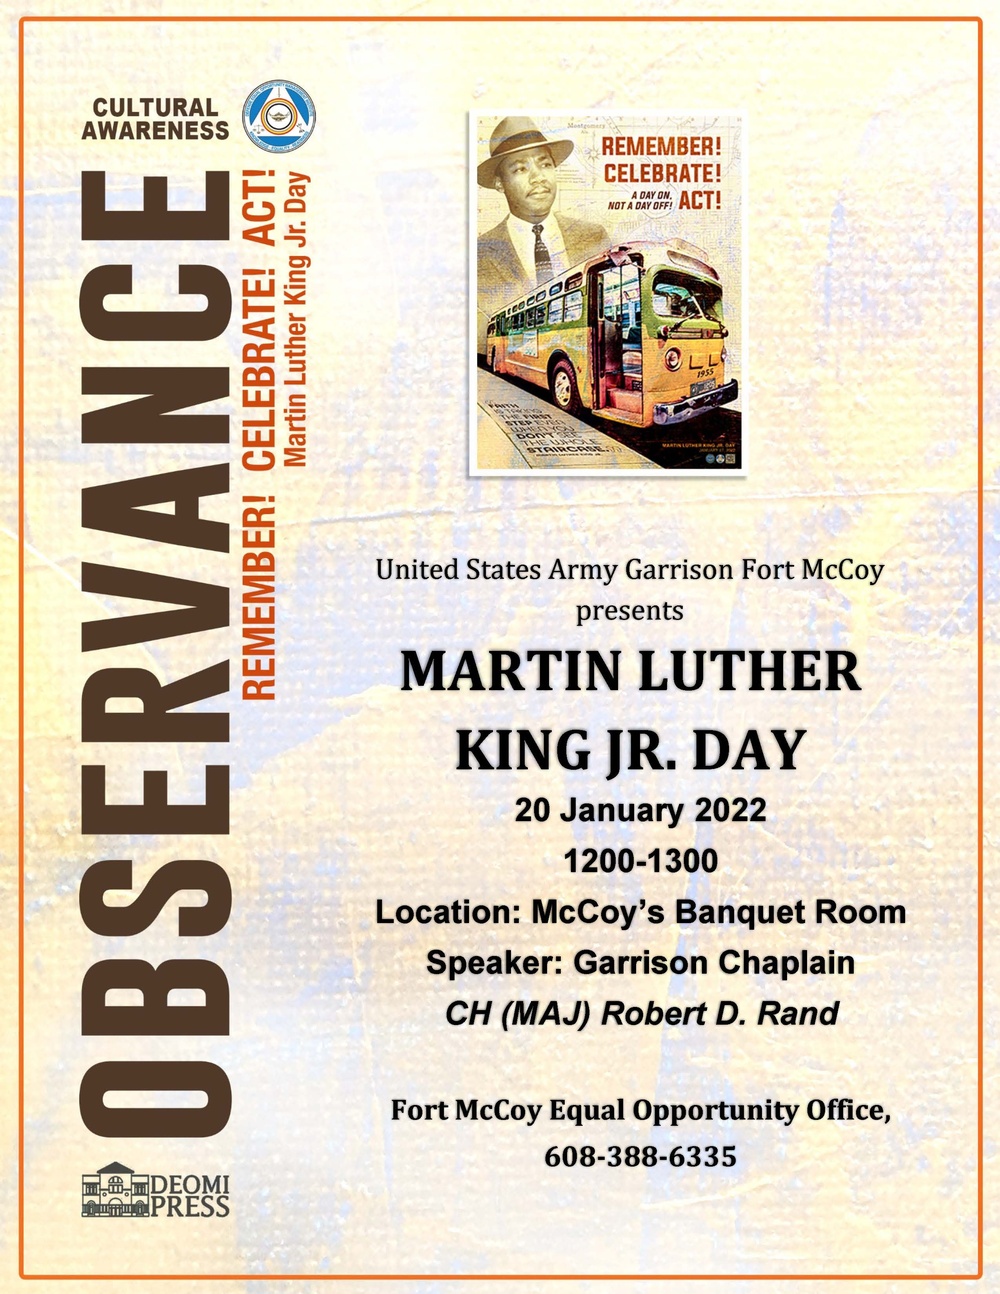 Dr. Martin Luther King Jr. Day poster